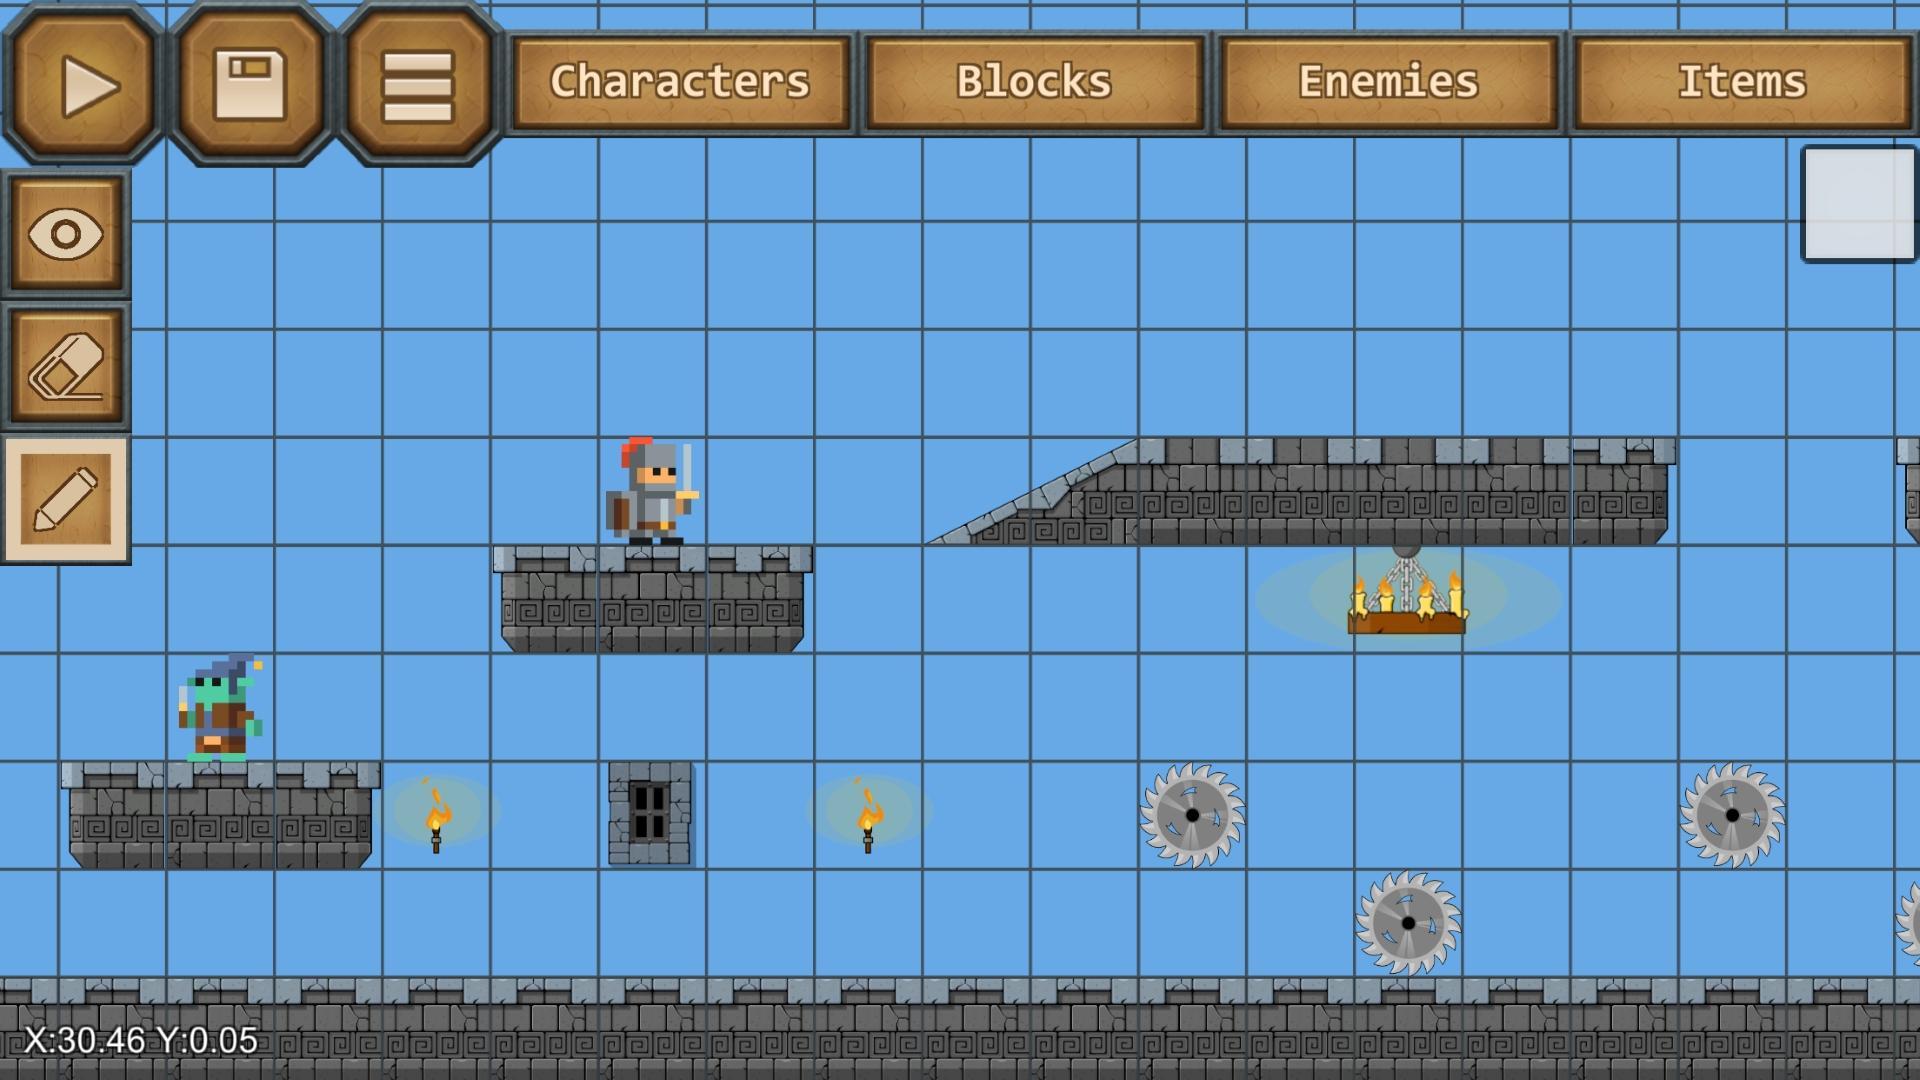 Epic Game Maker Create and Share Your Levels 1.9 Screenshot 6